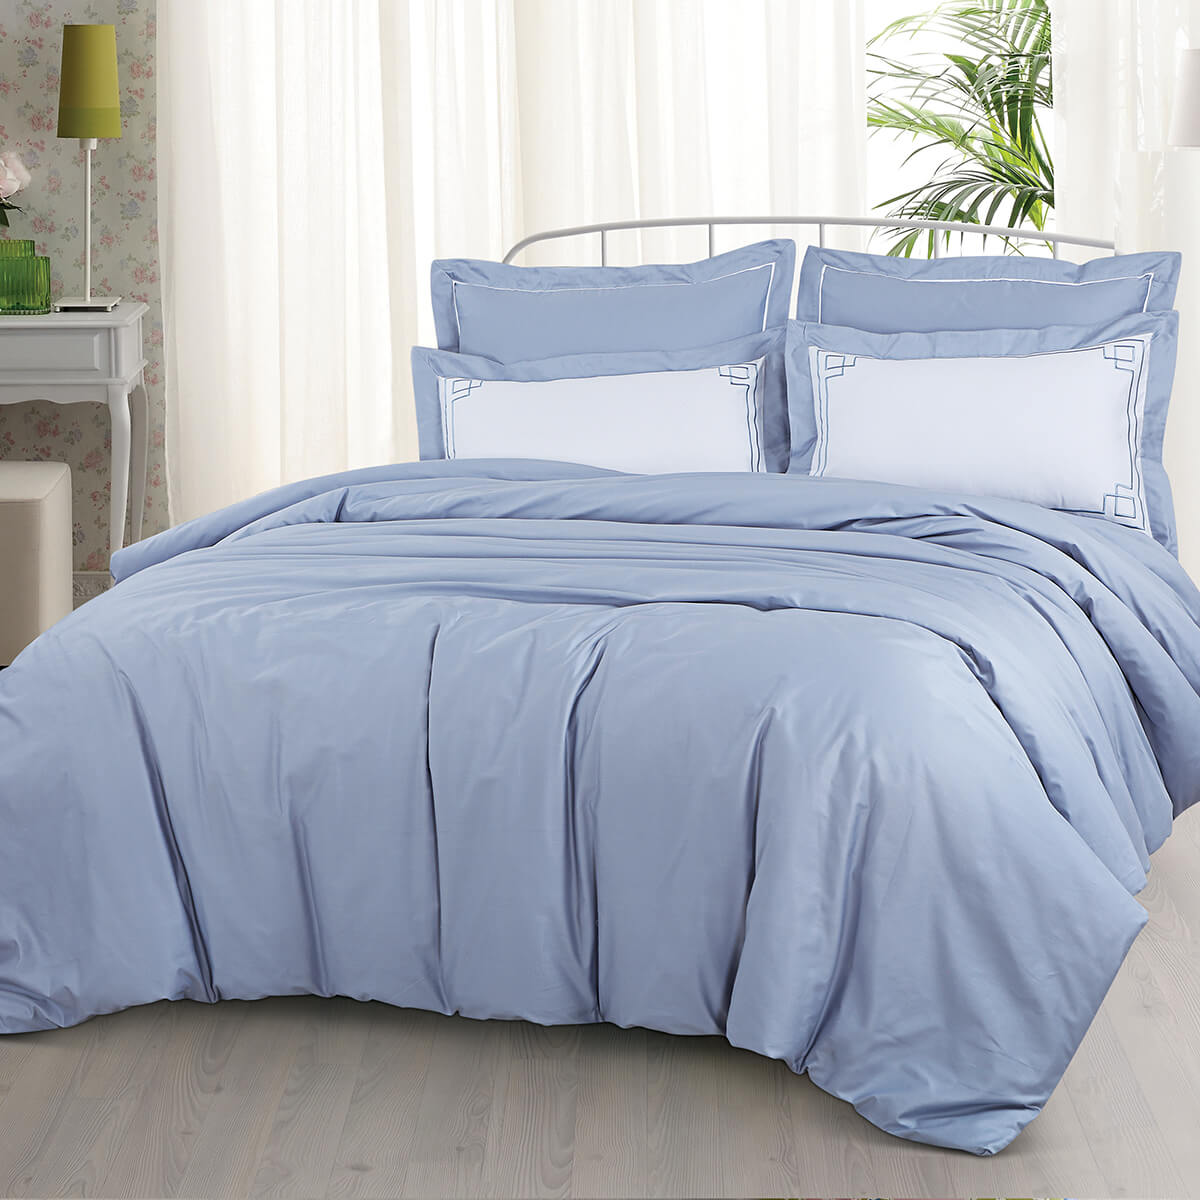 Malako Grace Embroidered Bed Sheet - Pigeon Blue Solid King Size 100% Cotton Bedsheet With 4 Pillow Covers - MALAKO